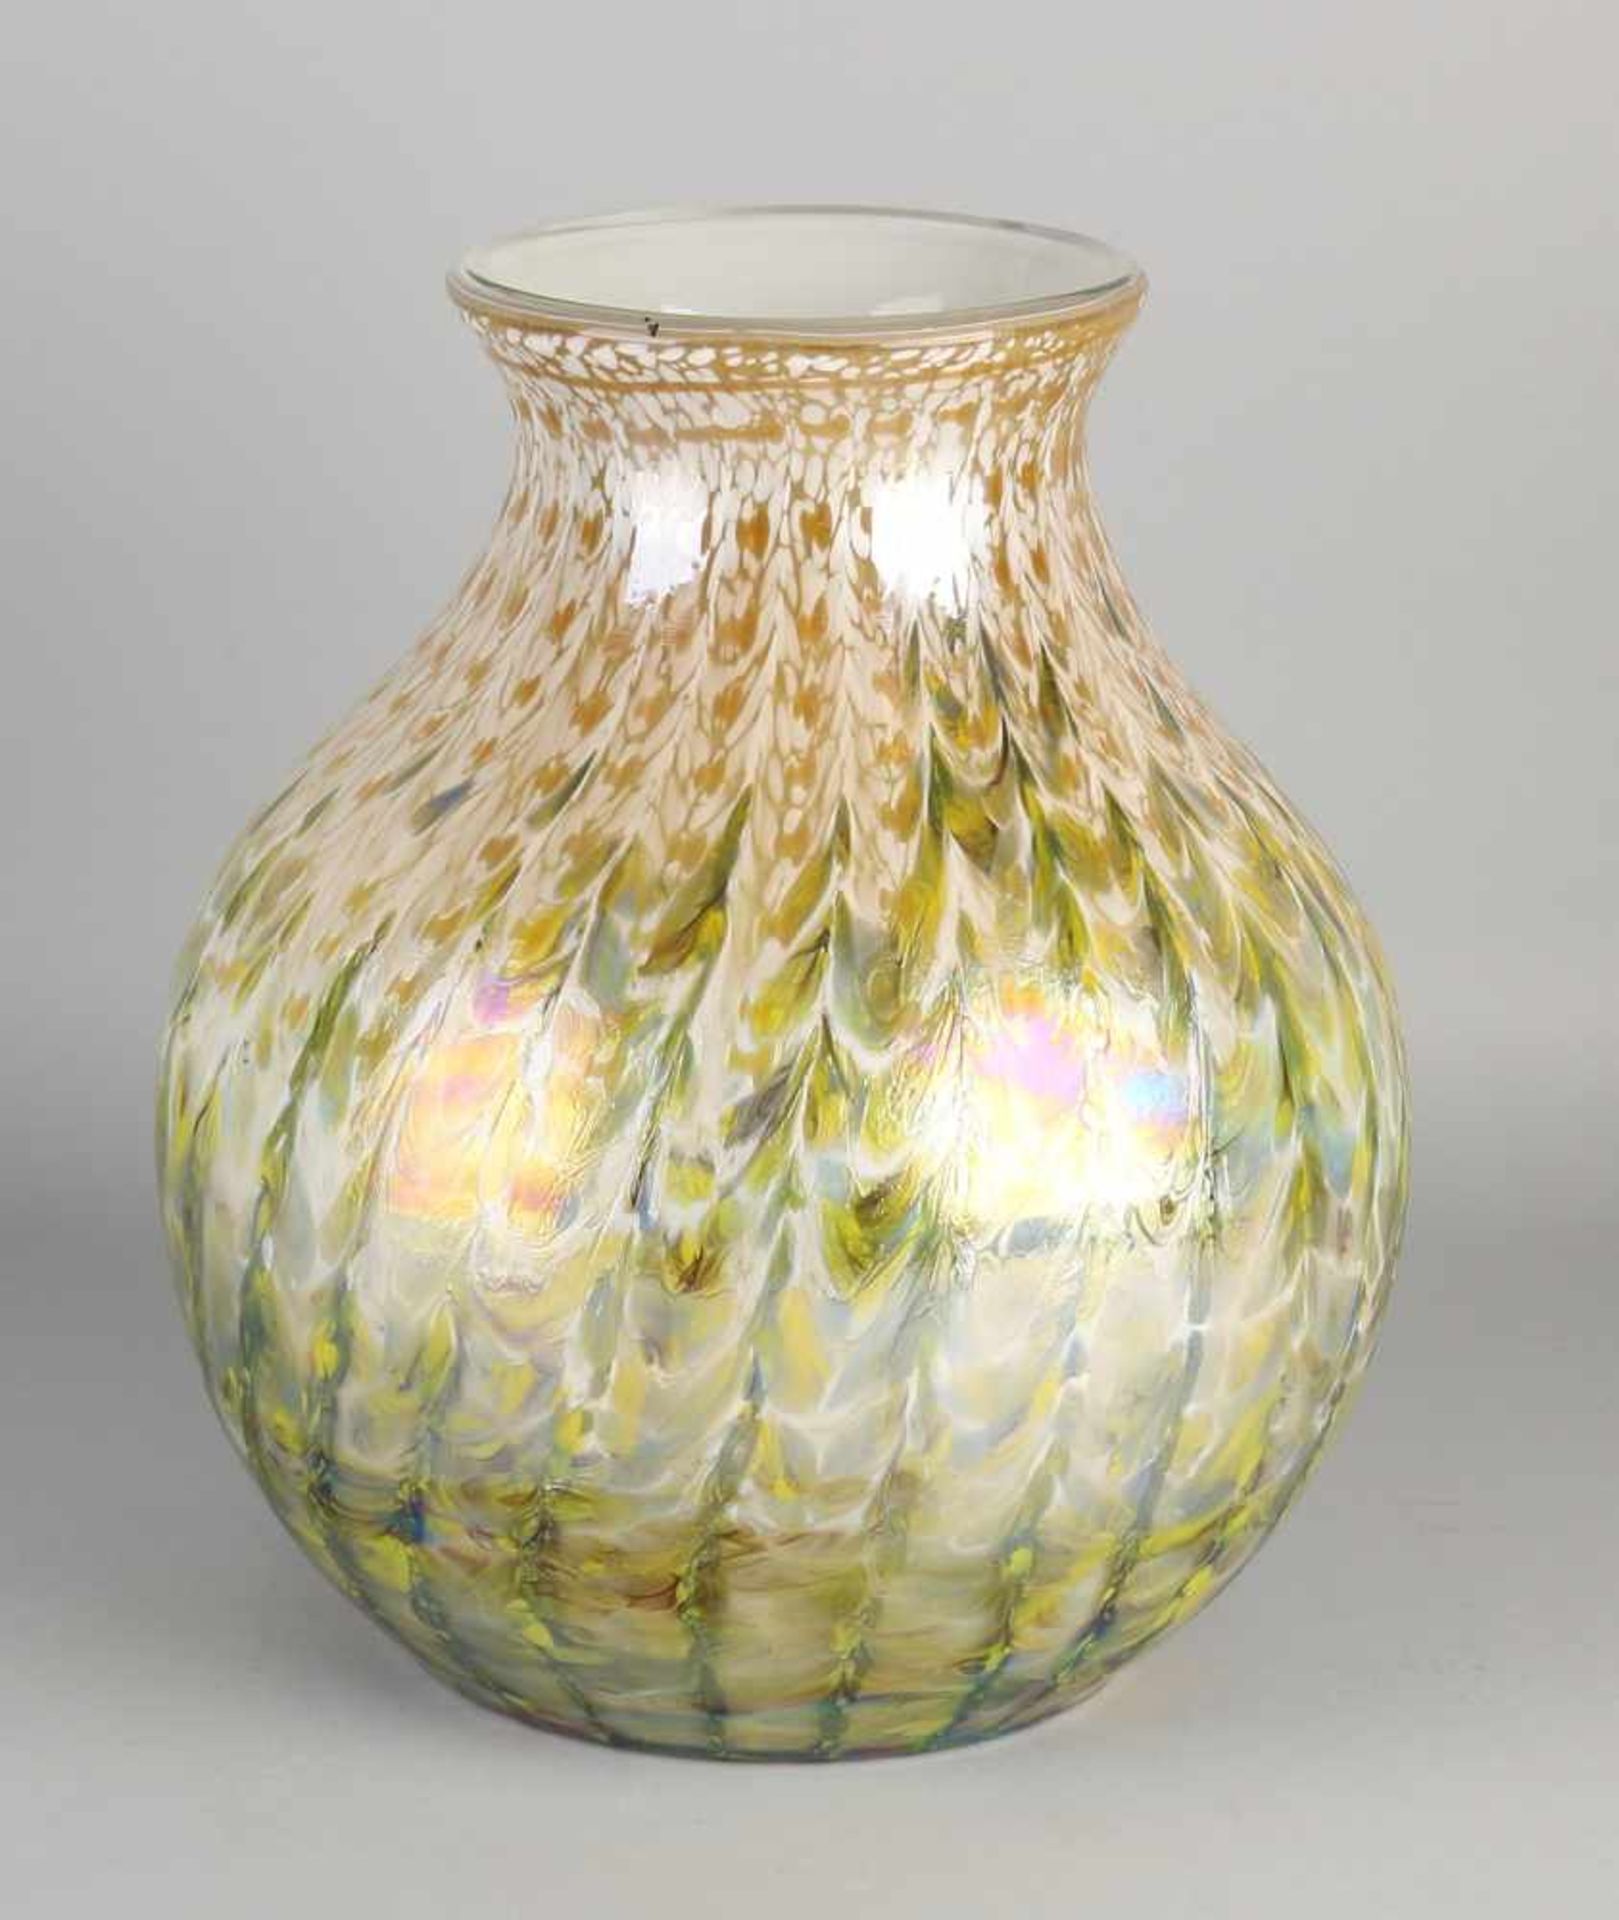 Large glass design vase with multicolored iridescent decor. 20th century. Monogrammed L.H.S. Size: H